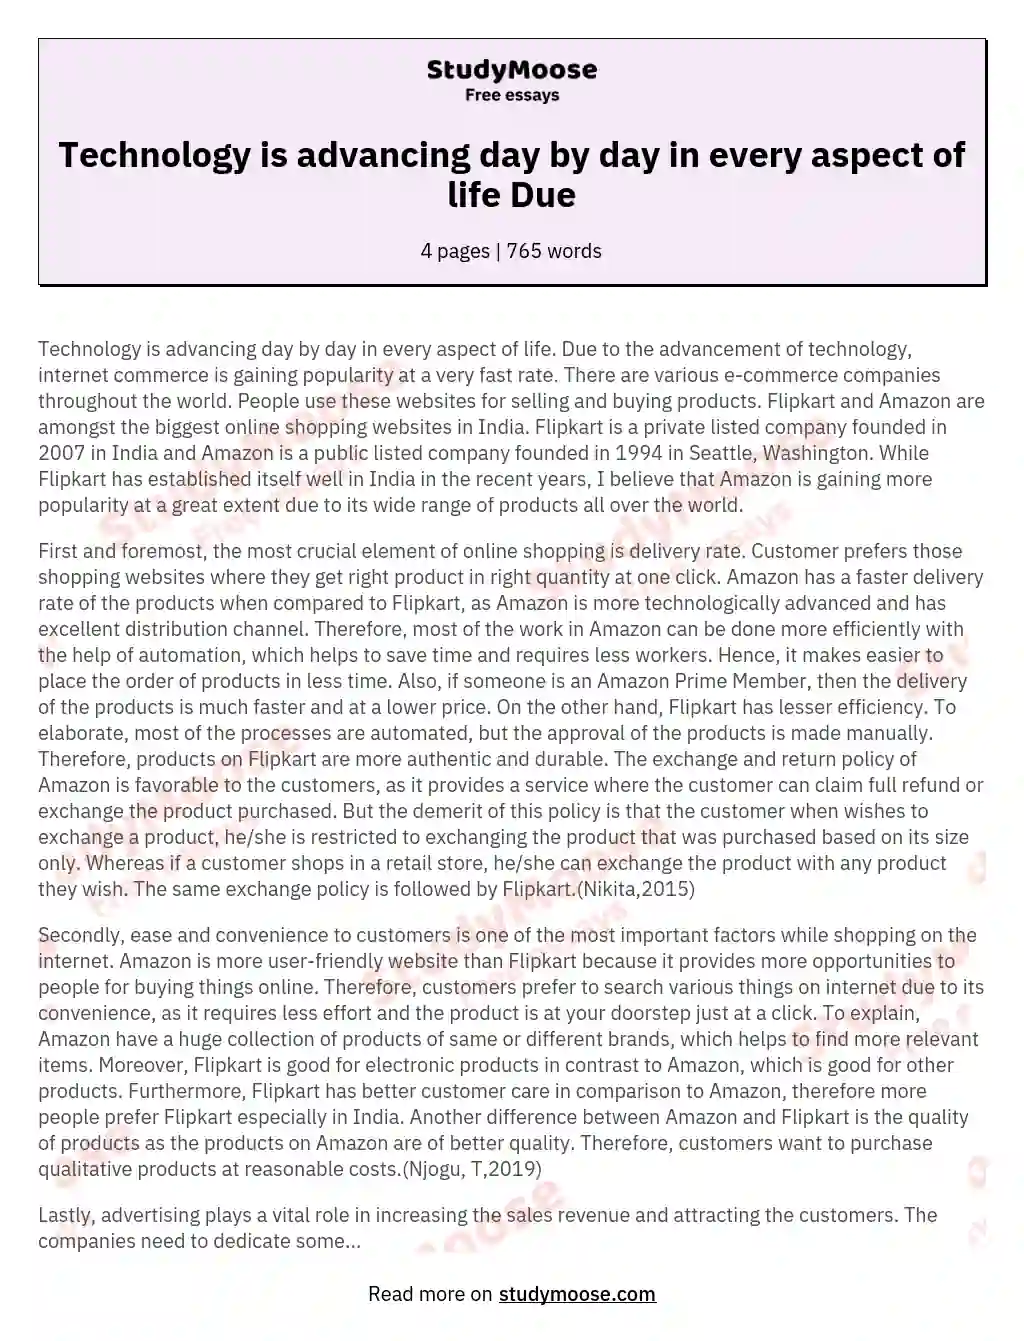 Technology is advancing day by day in every aspect of life Due essay